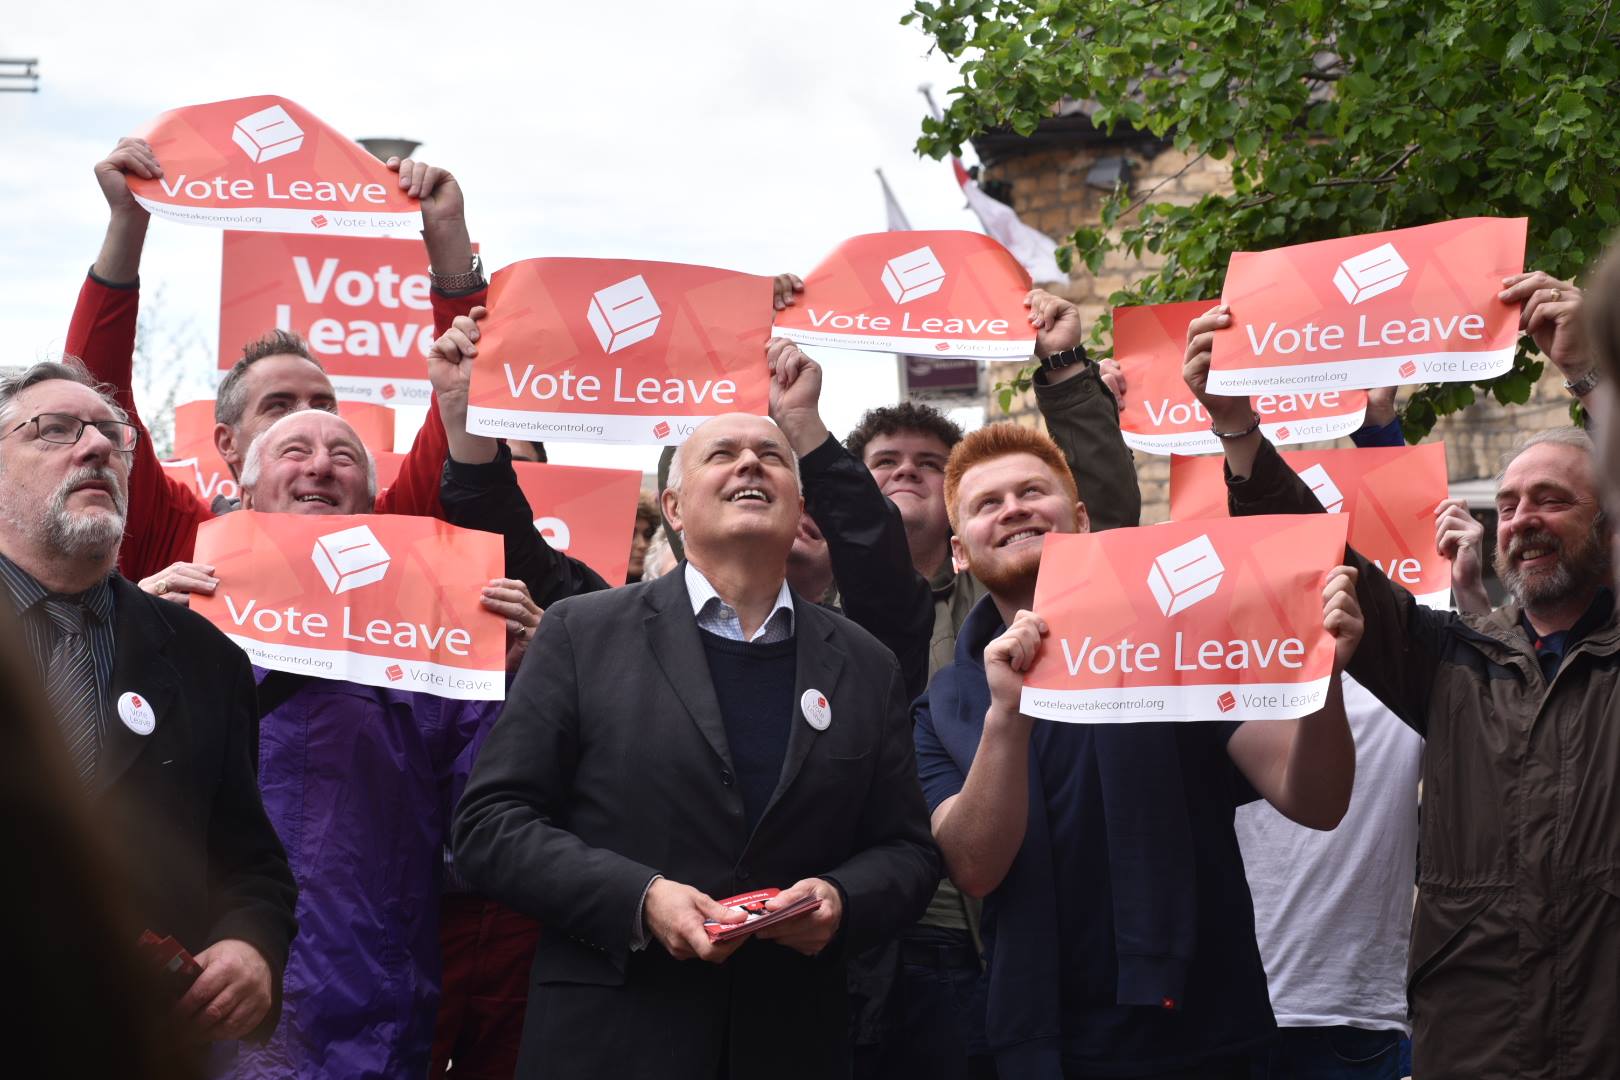 The Vote Leave campaign group in Lincoln. Photo: Steve Smailes for The Lincolnite